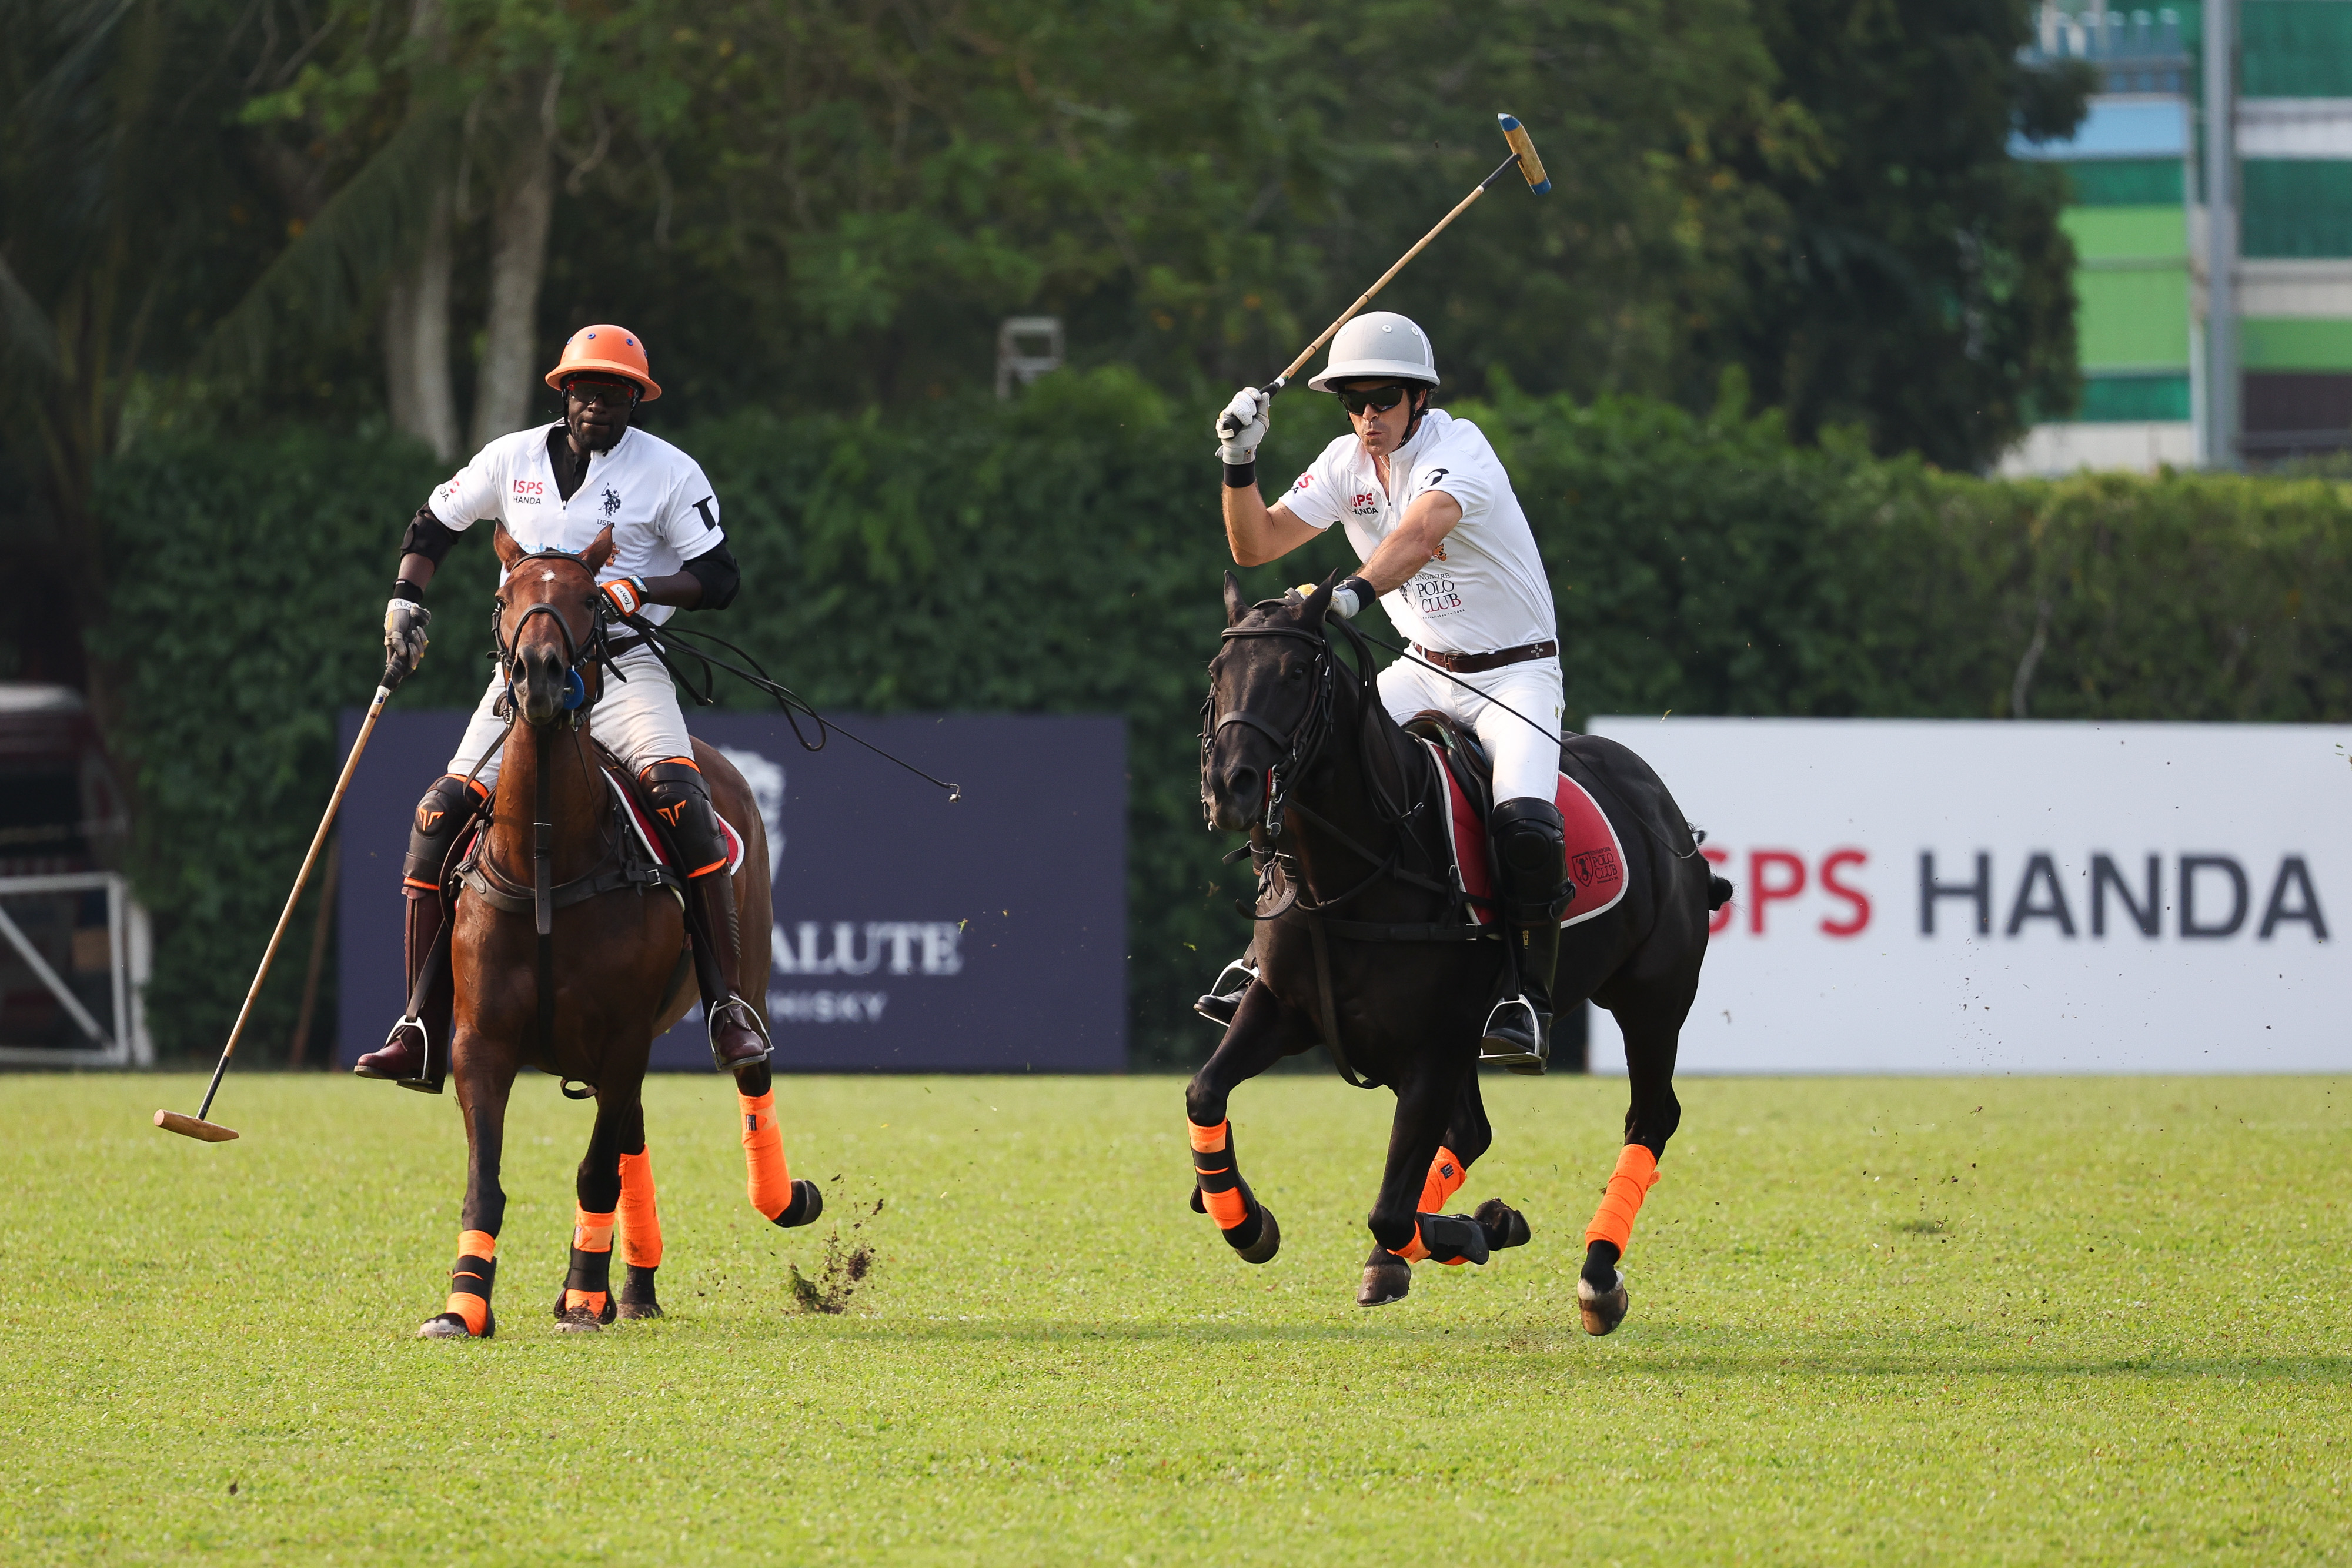 People playing polo